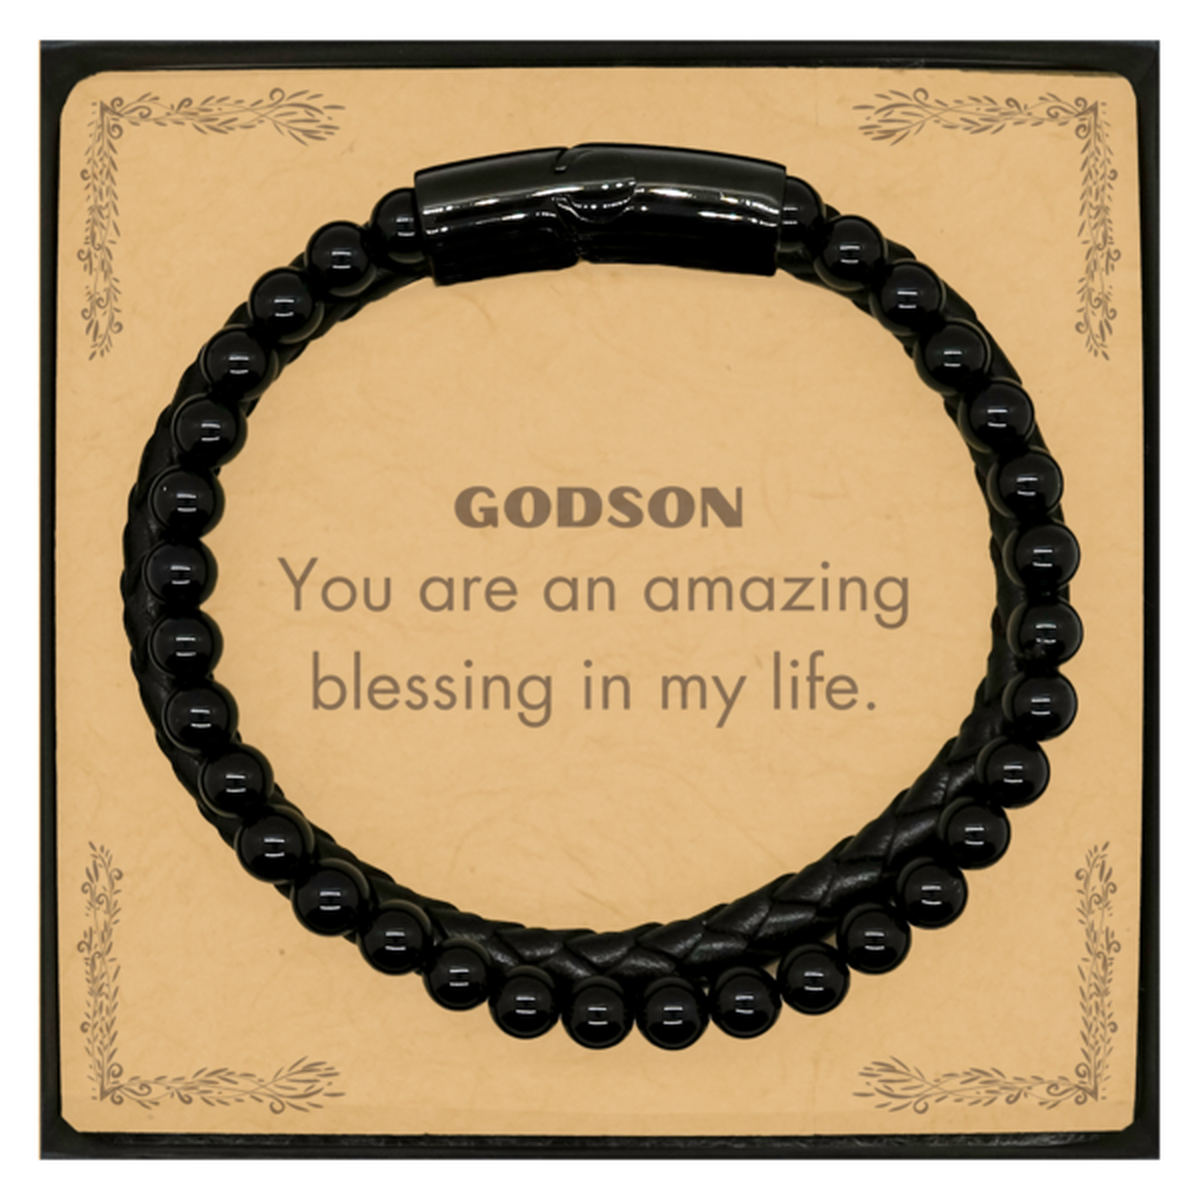 Godson Stone Leather Bracelets, You are an amazing blessing in my life, Thank You Gifts For Godson, Inspirational Birthday Christmas Unique Gifts For Godson